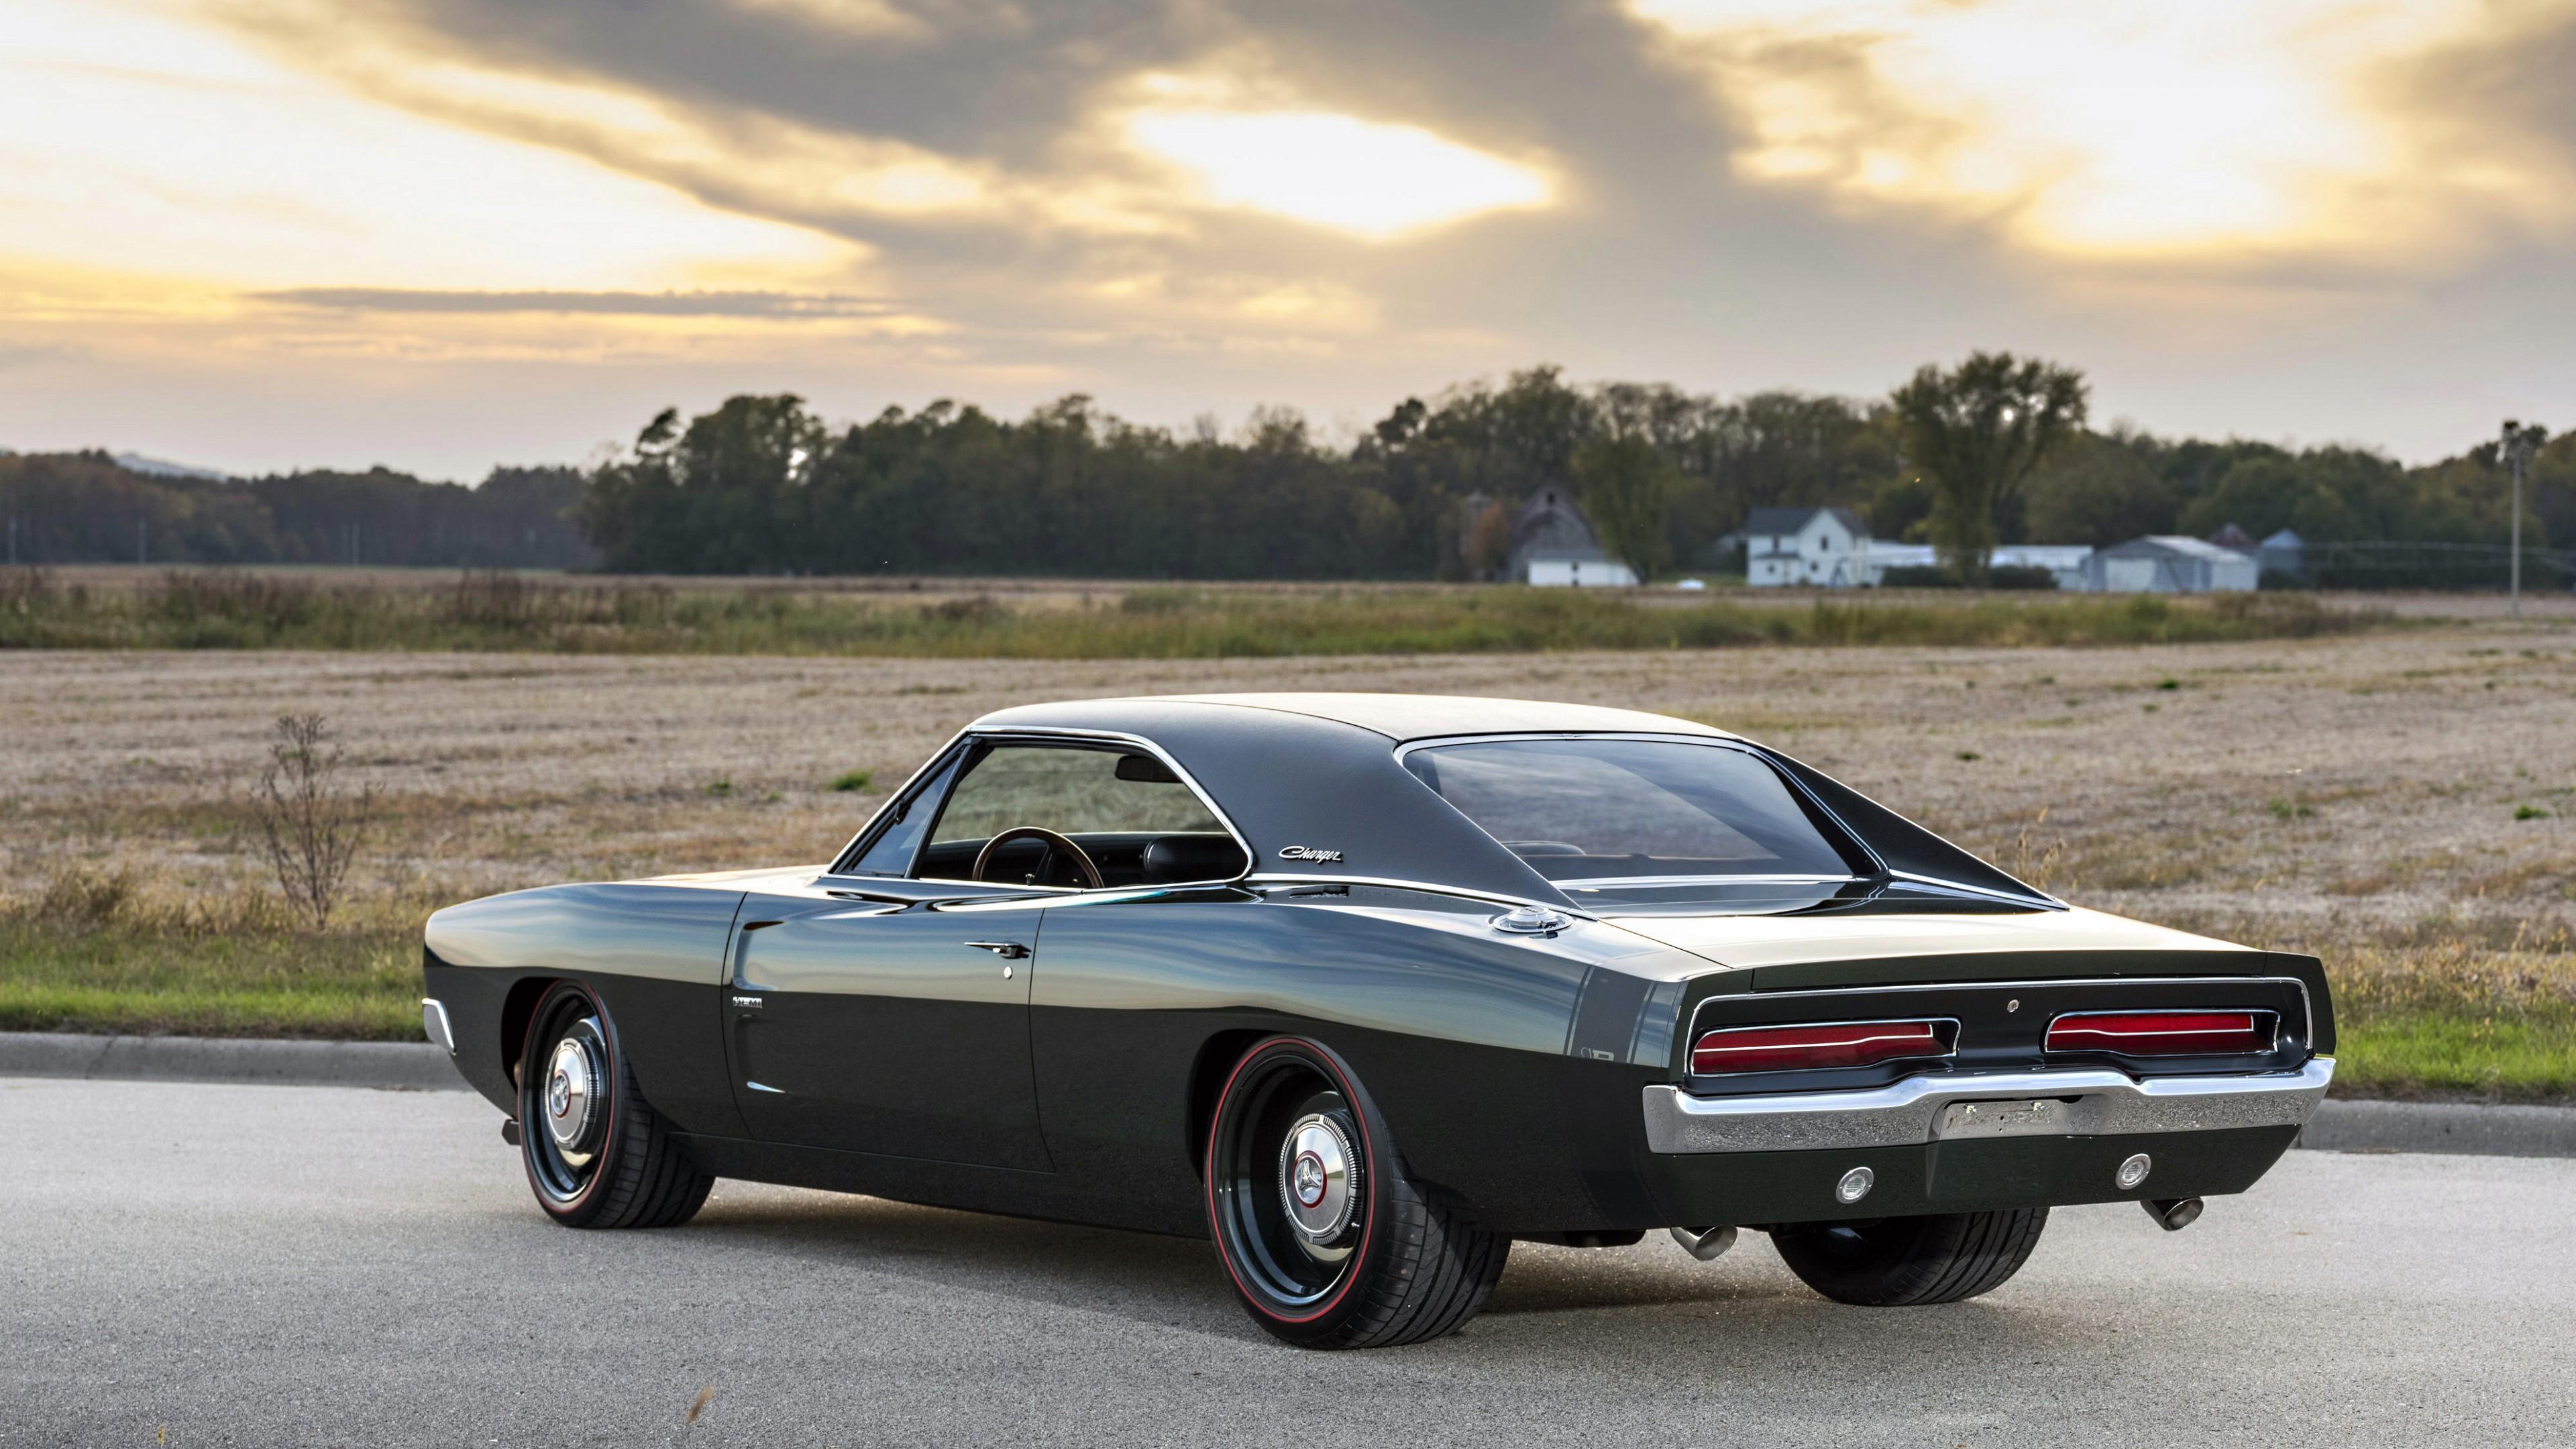 HD wallpaper, 1969 Ringbrothers Dodge Charger Defector Rear View 4K